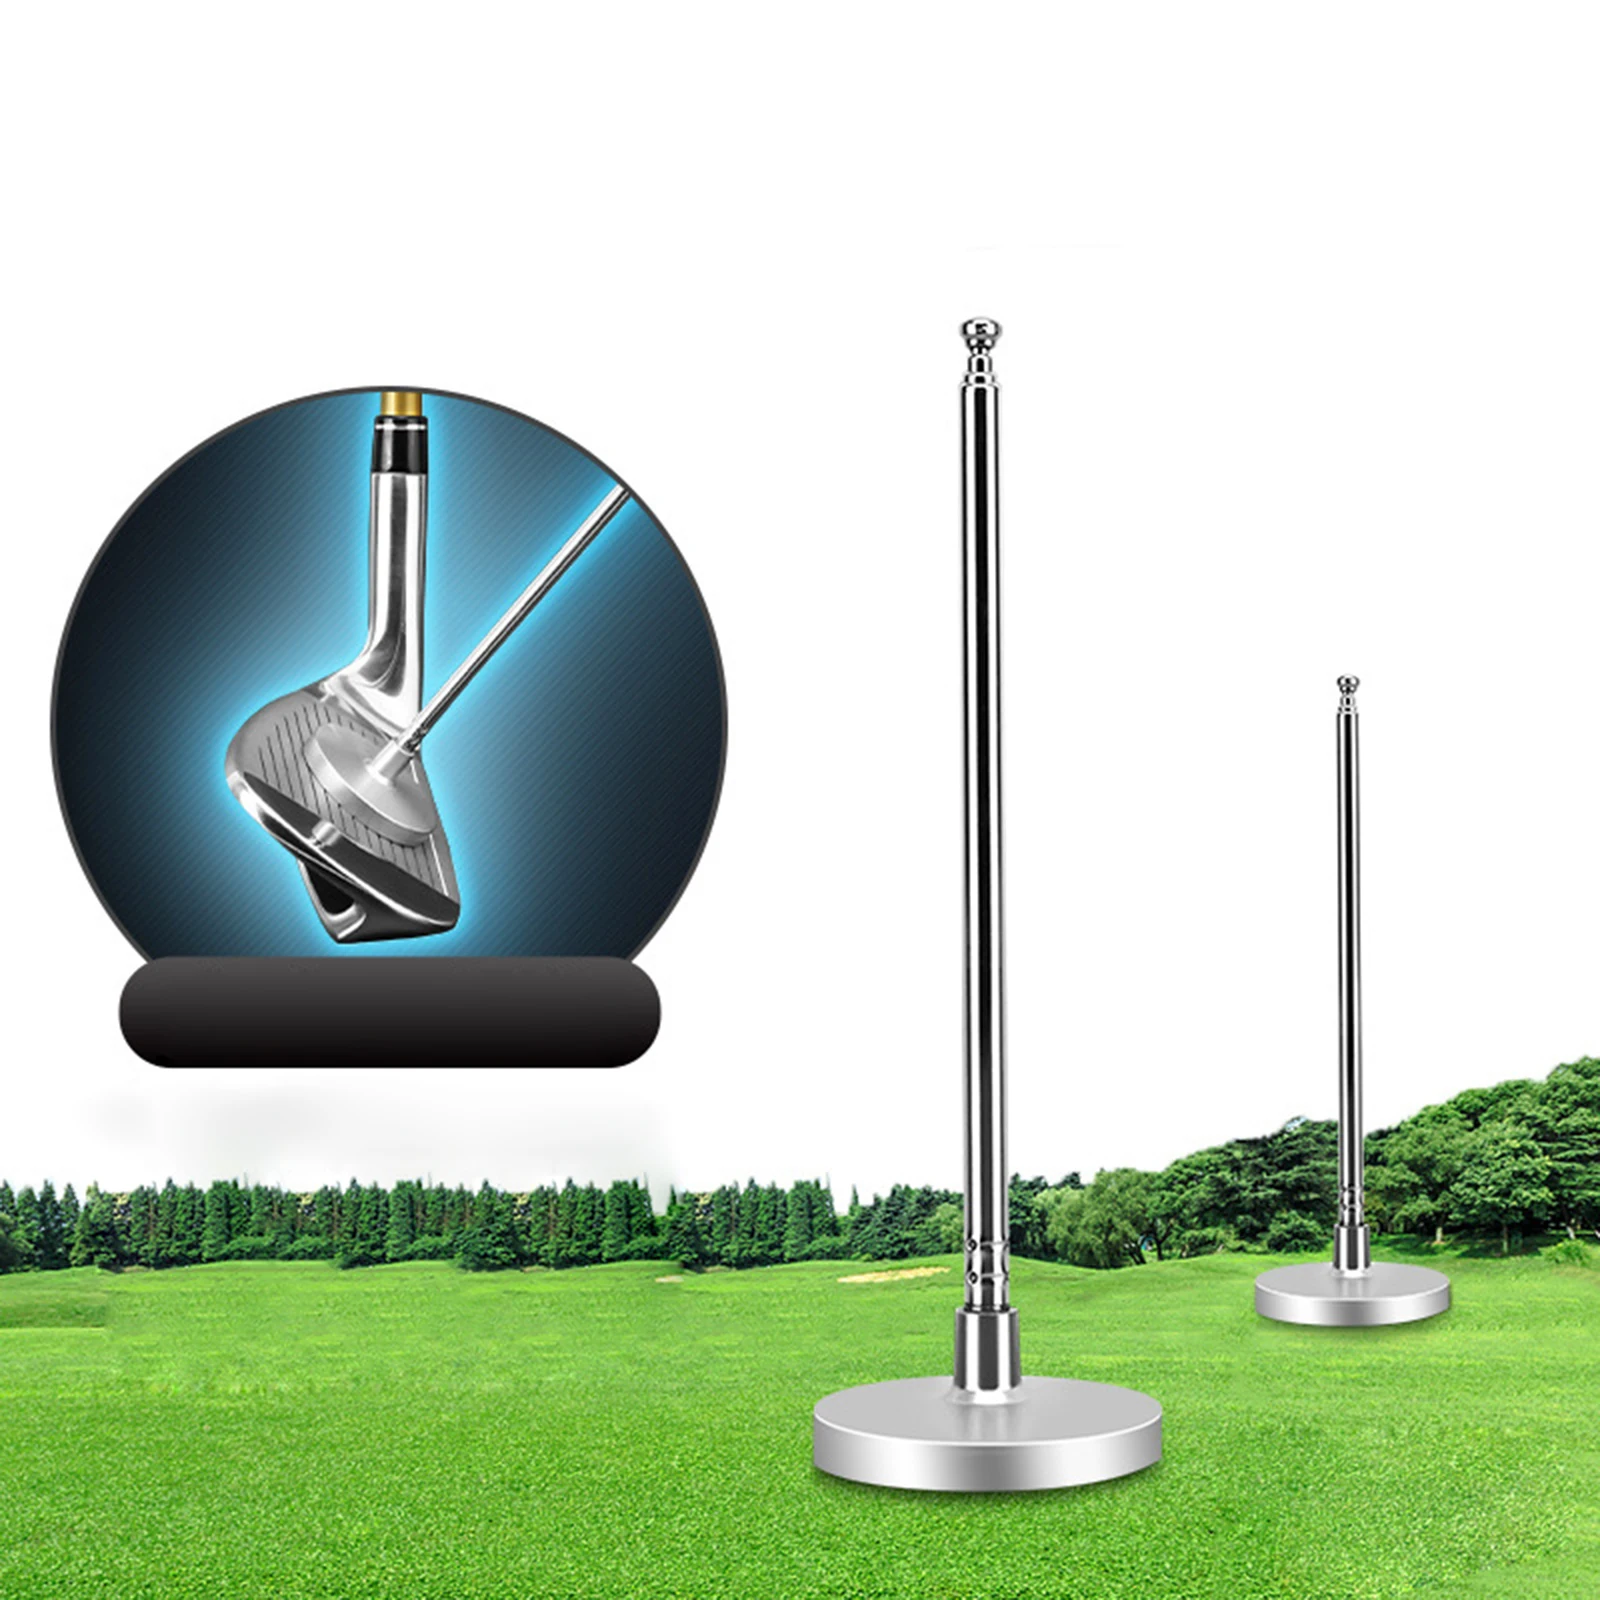 Adjustable Golf Cutter Direction Indicator Magnetic Swing Club Correct Alignment Stick Rod Aim Lie Angle Training Aids Tools